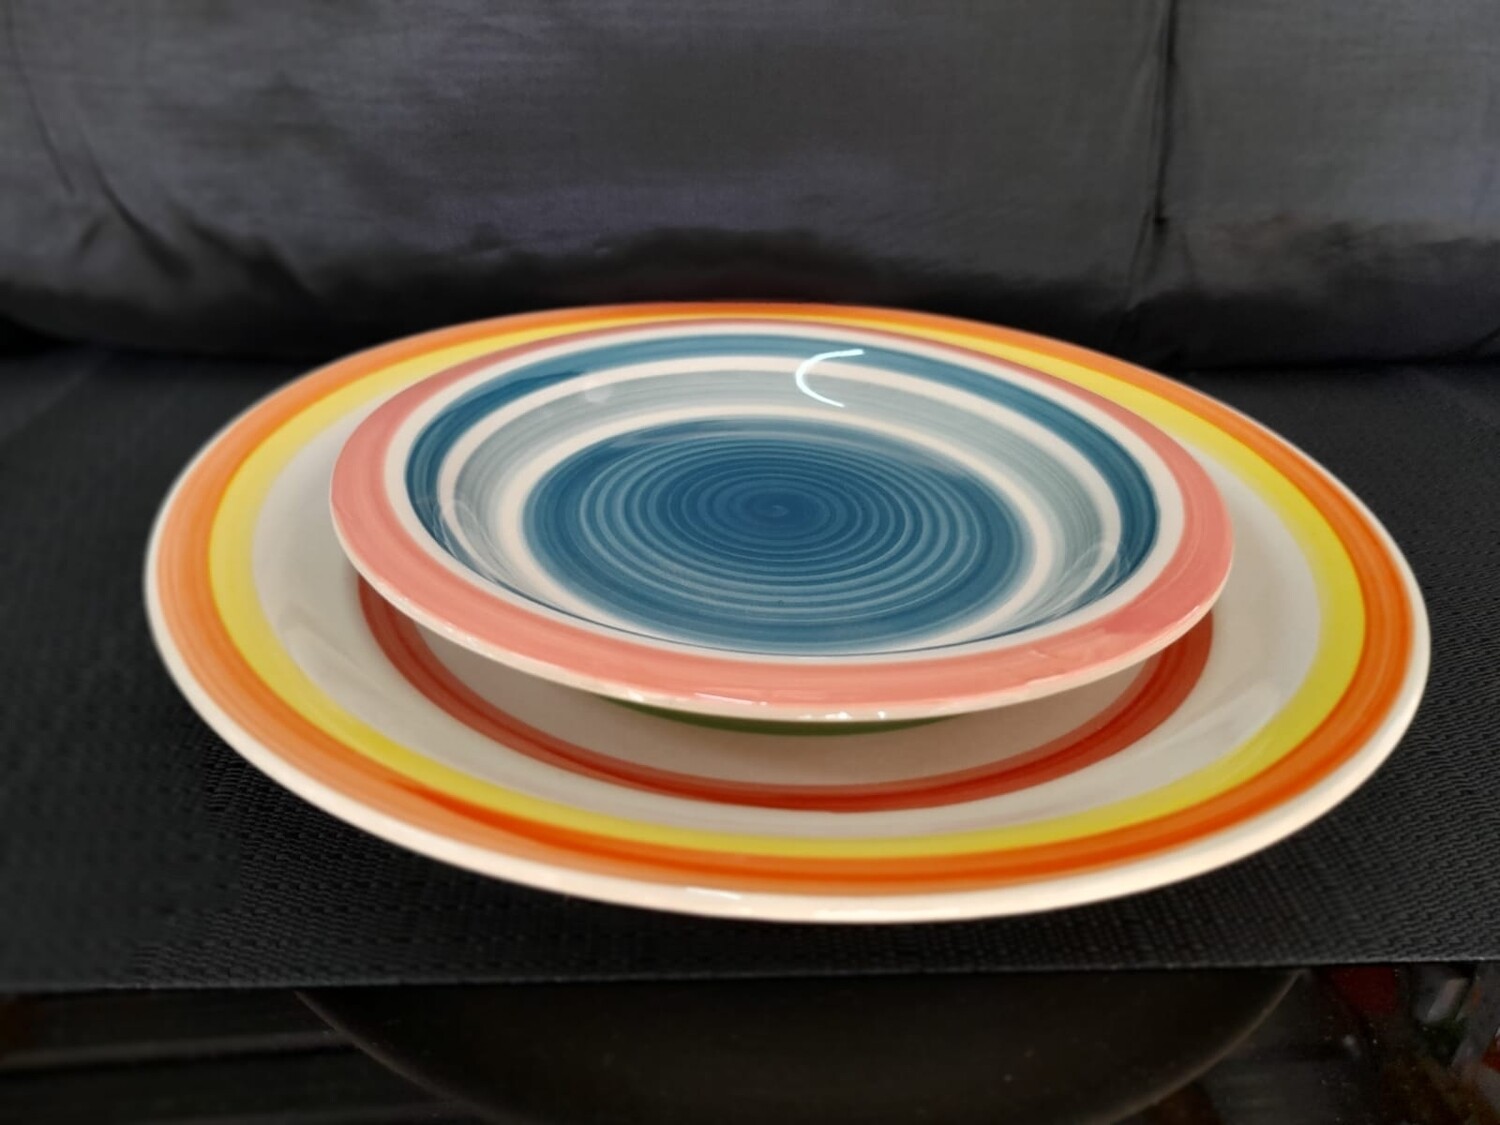 Mix&Match 3 plates and 3 side plates